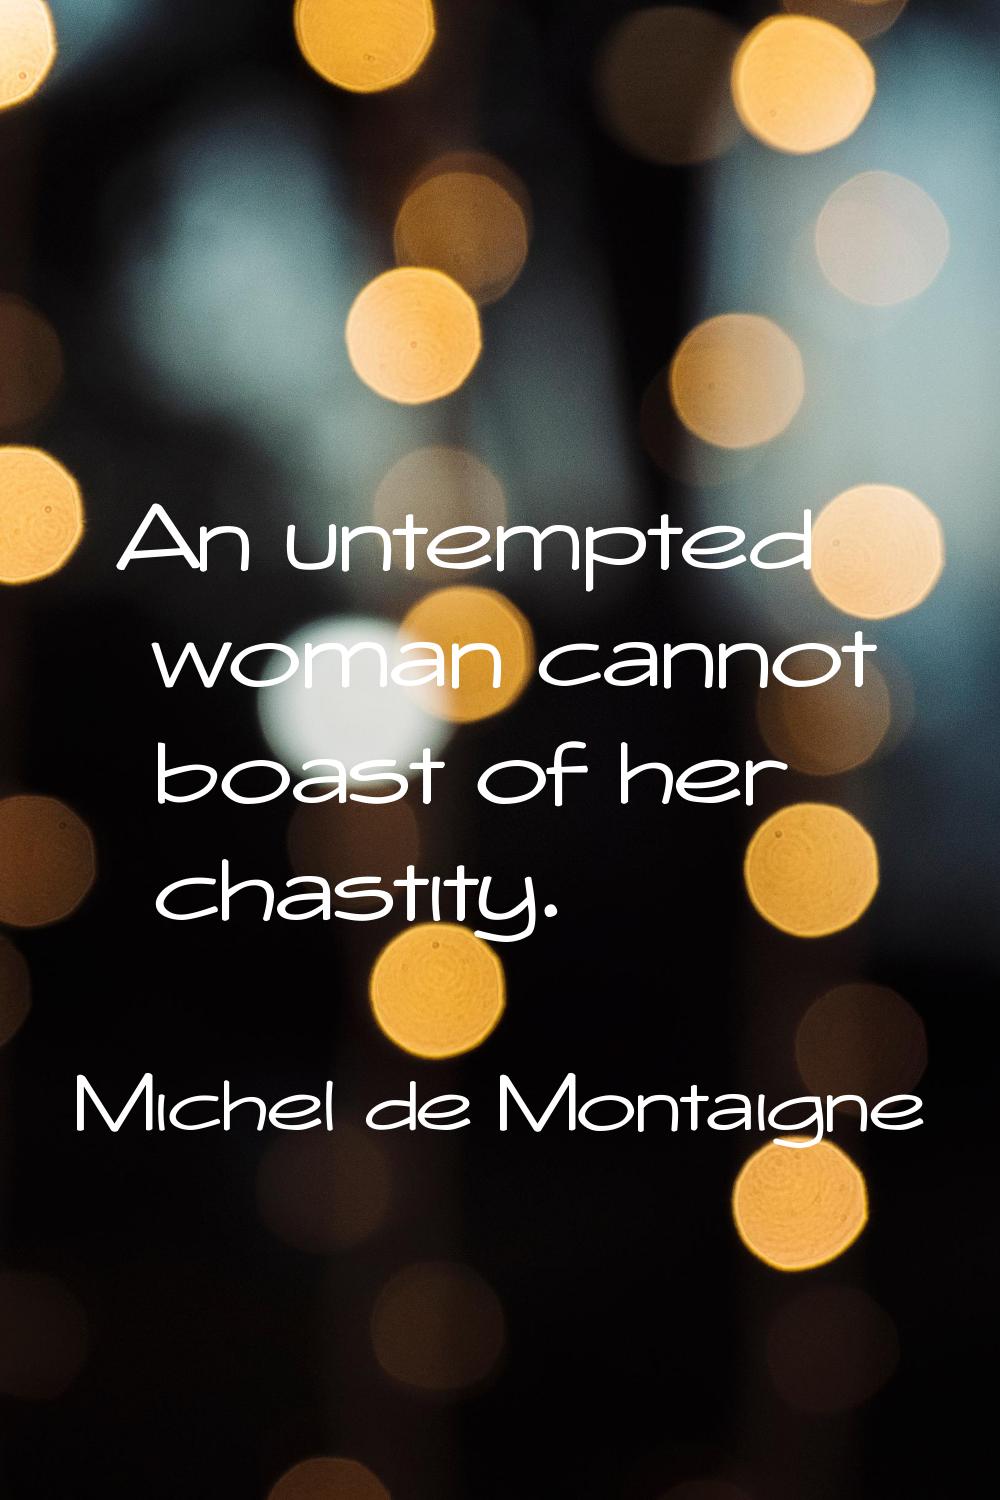 An untempted woman cannot boast of her chastity.